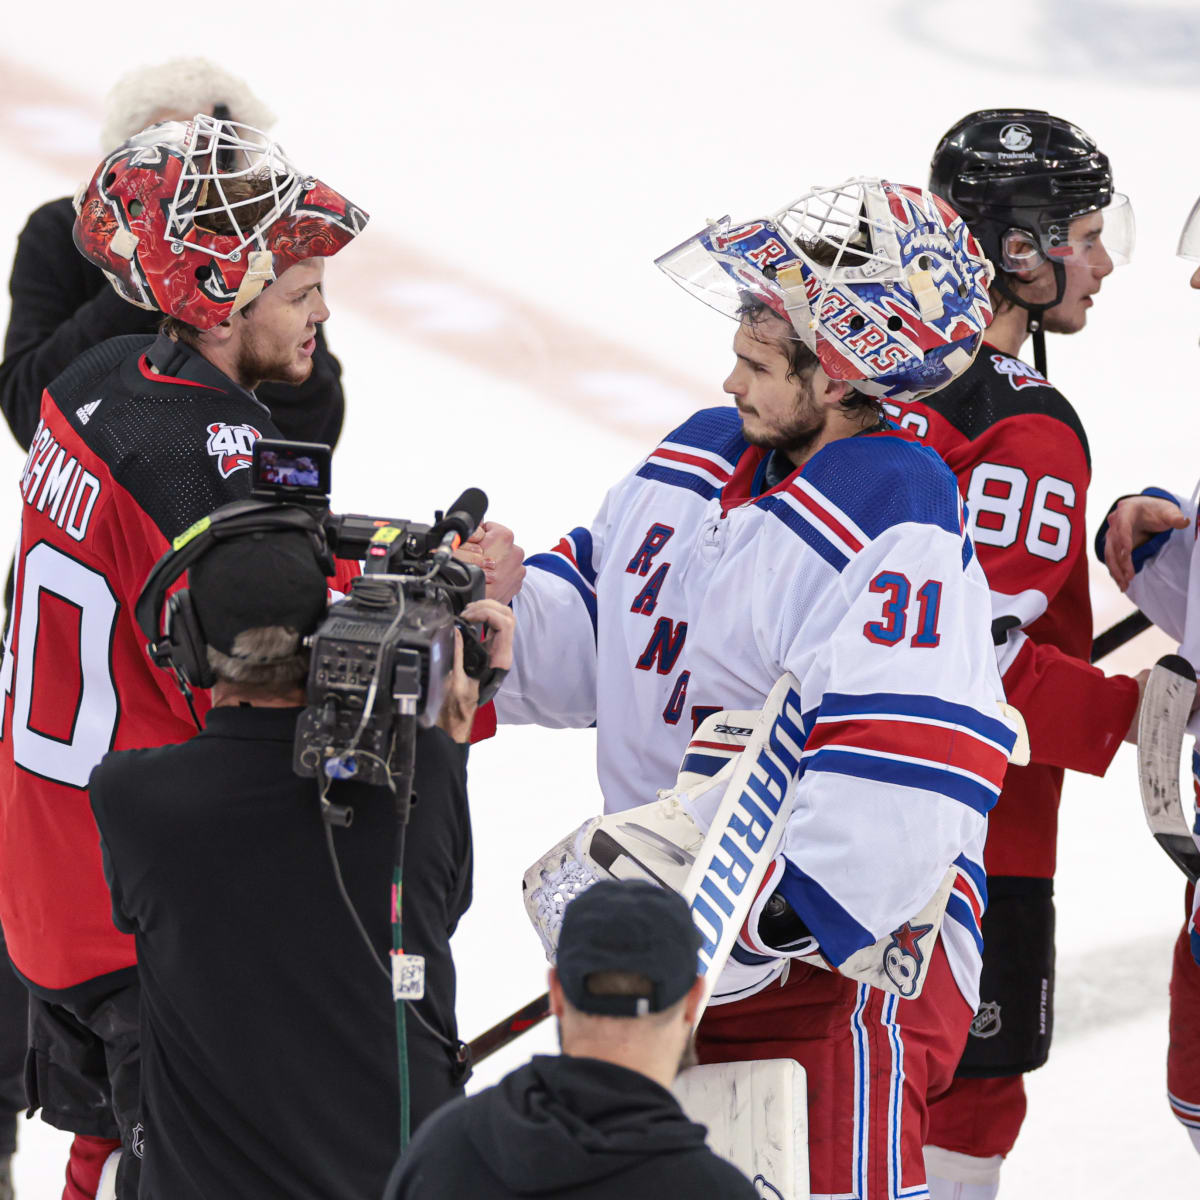 New York Rangers beat Washington Capitals in 7 to face New Jersey Devils, NHL